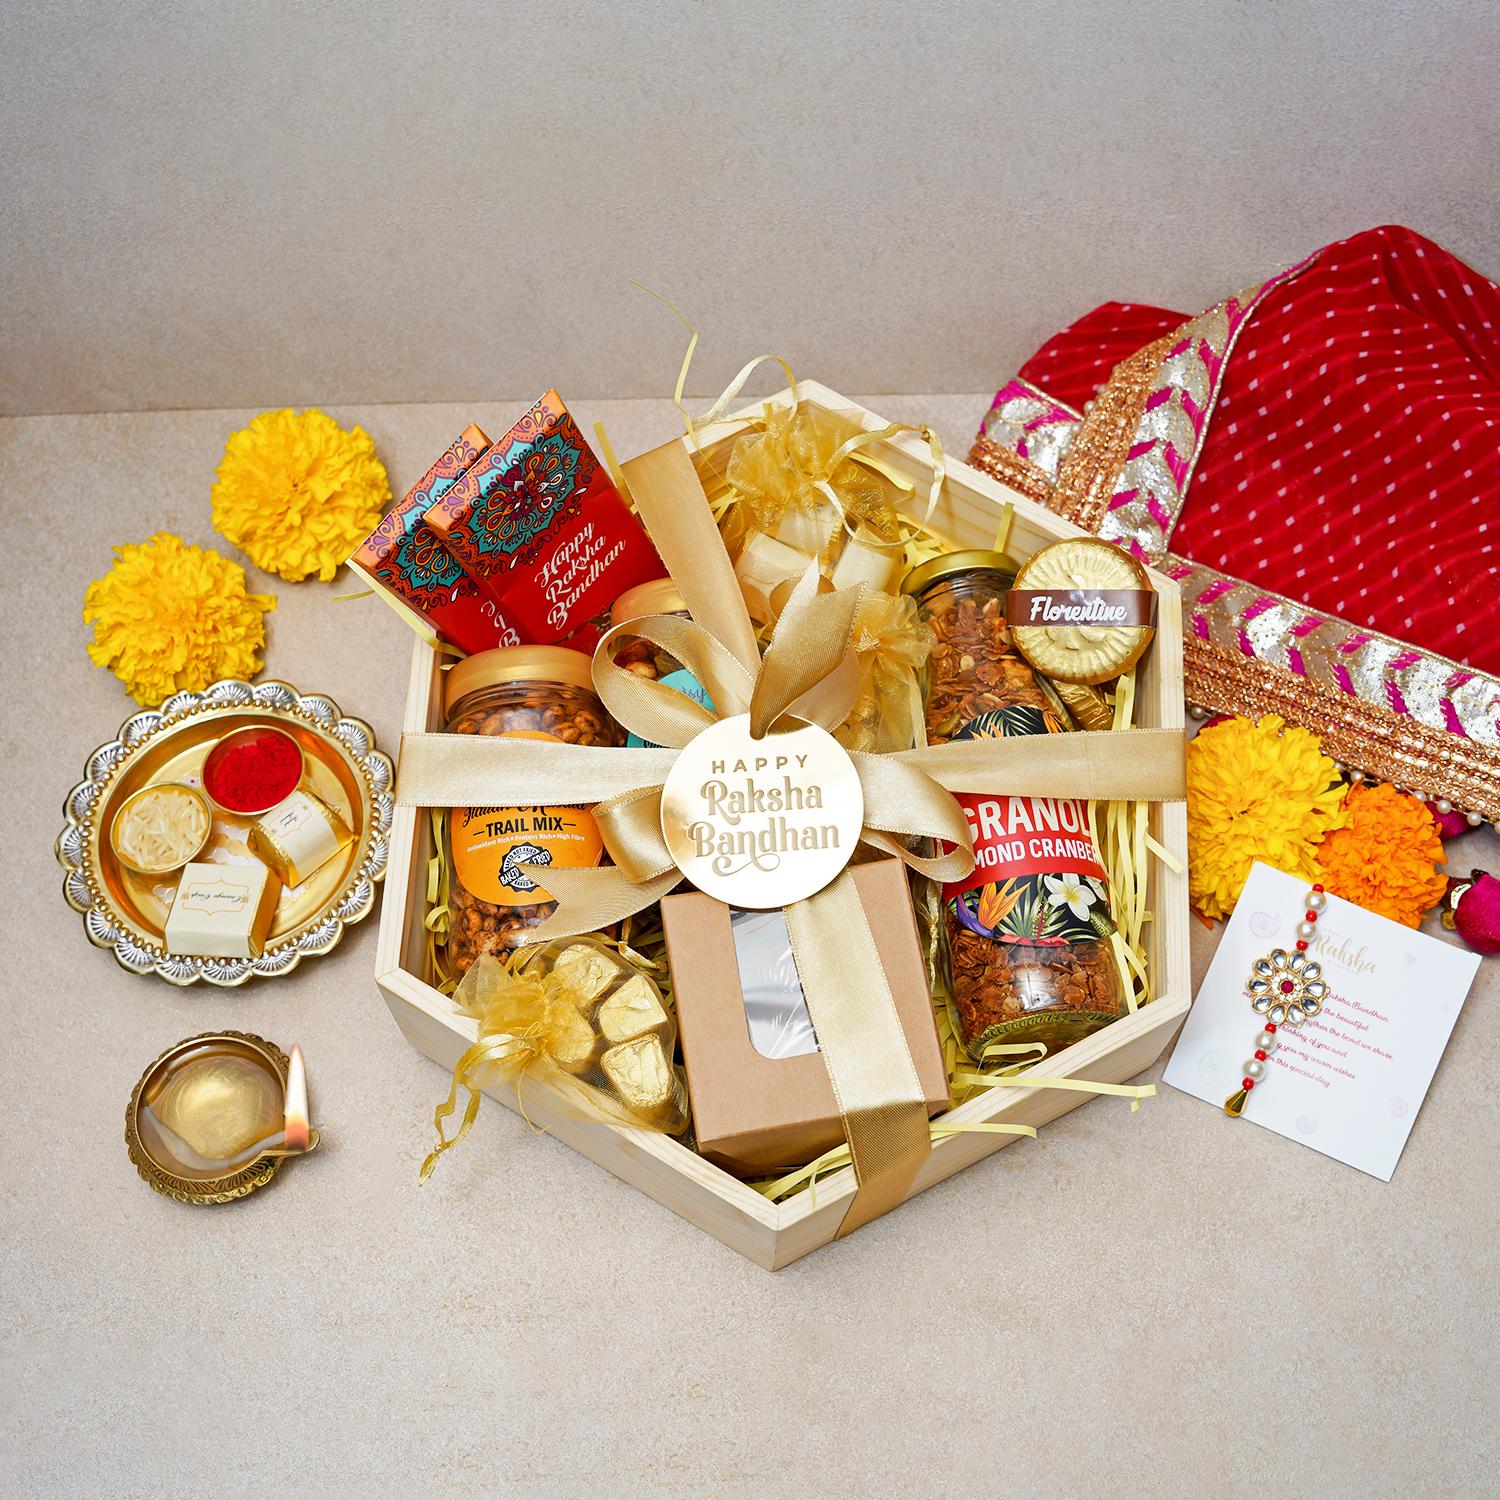 Gift Baskets, Gift Boxes, Gift Bags | South Carolina – Aunt Laurie's